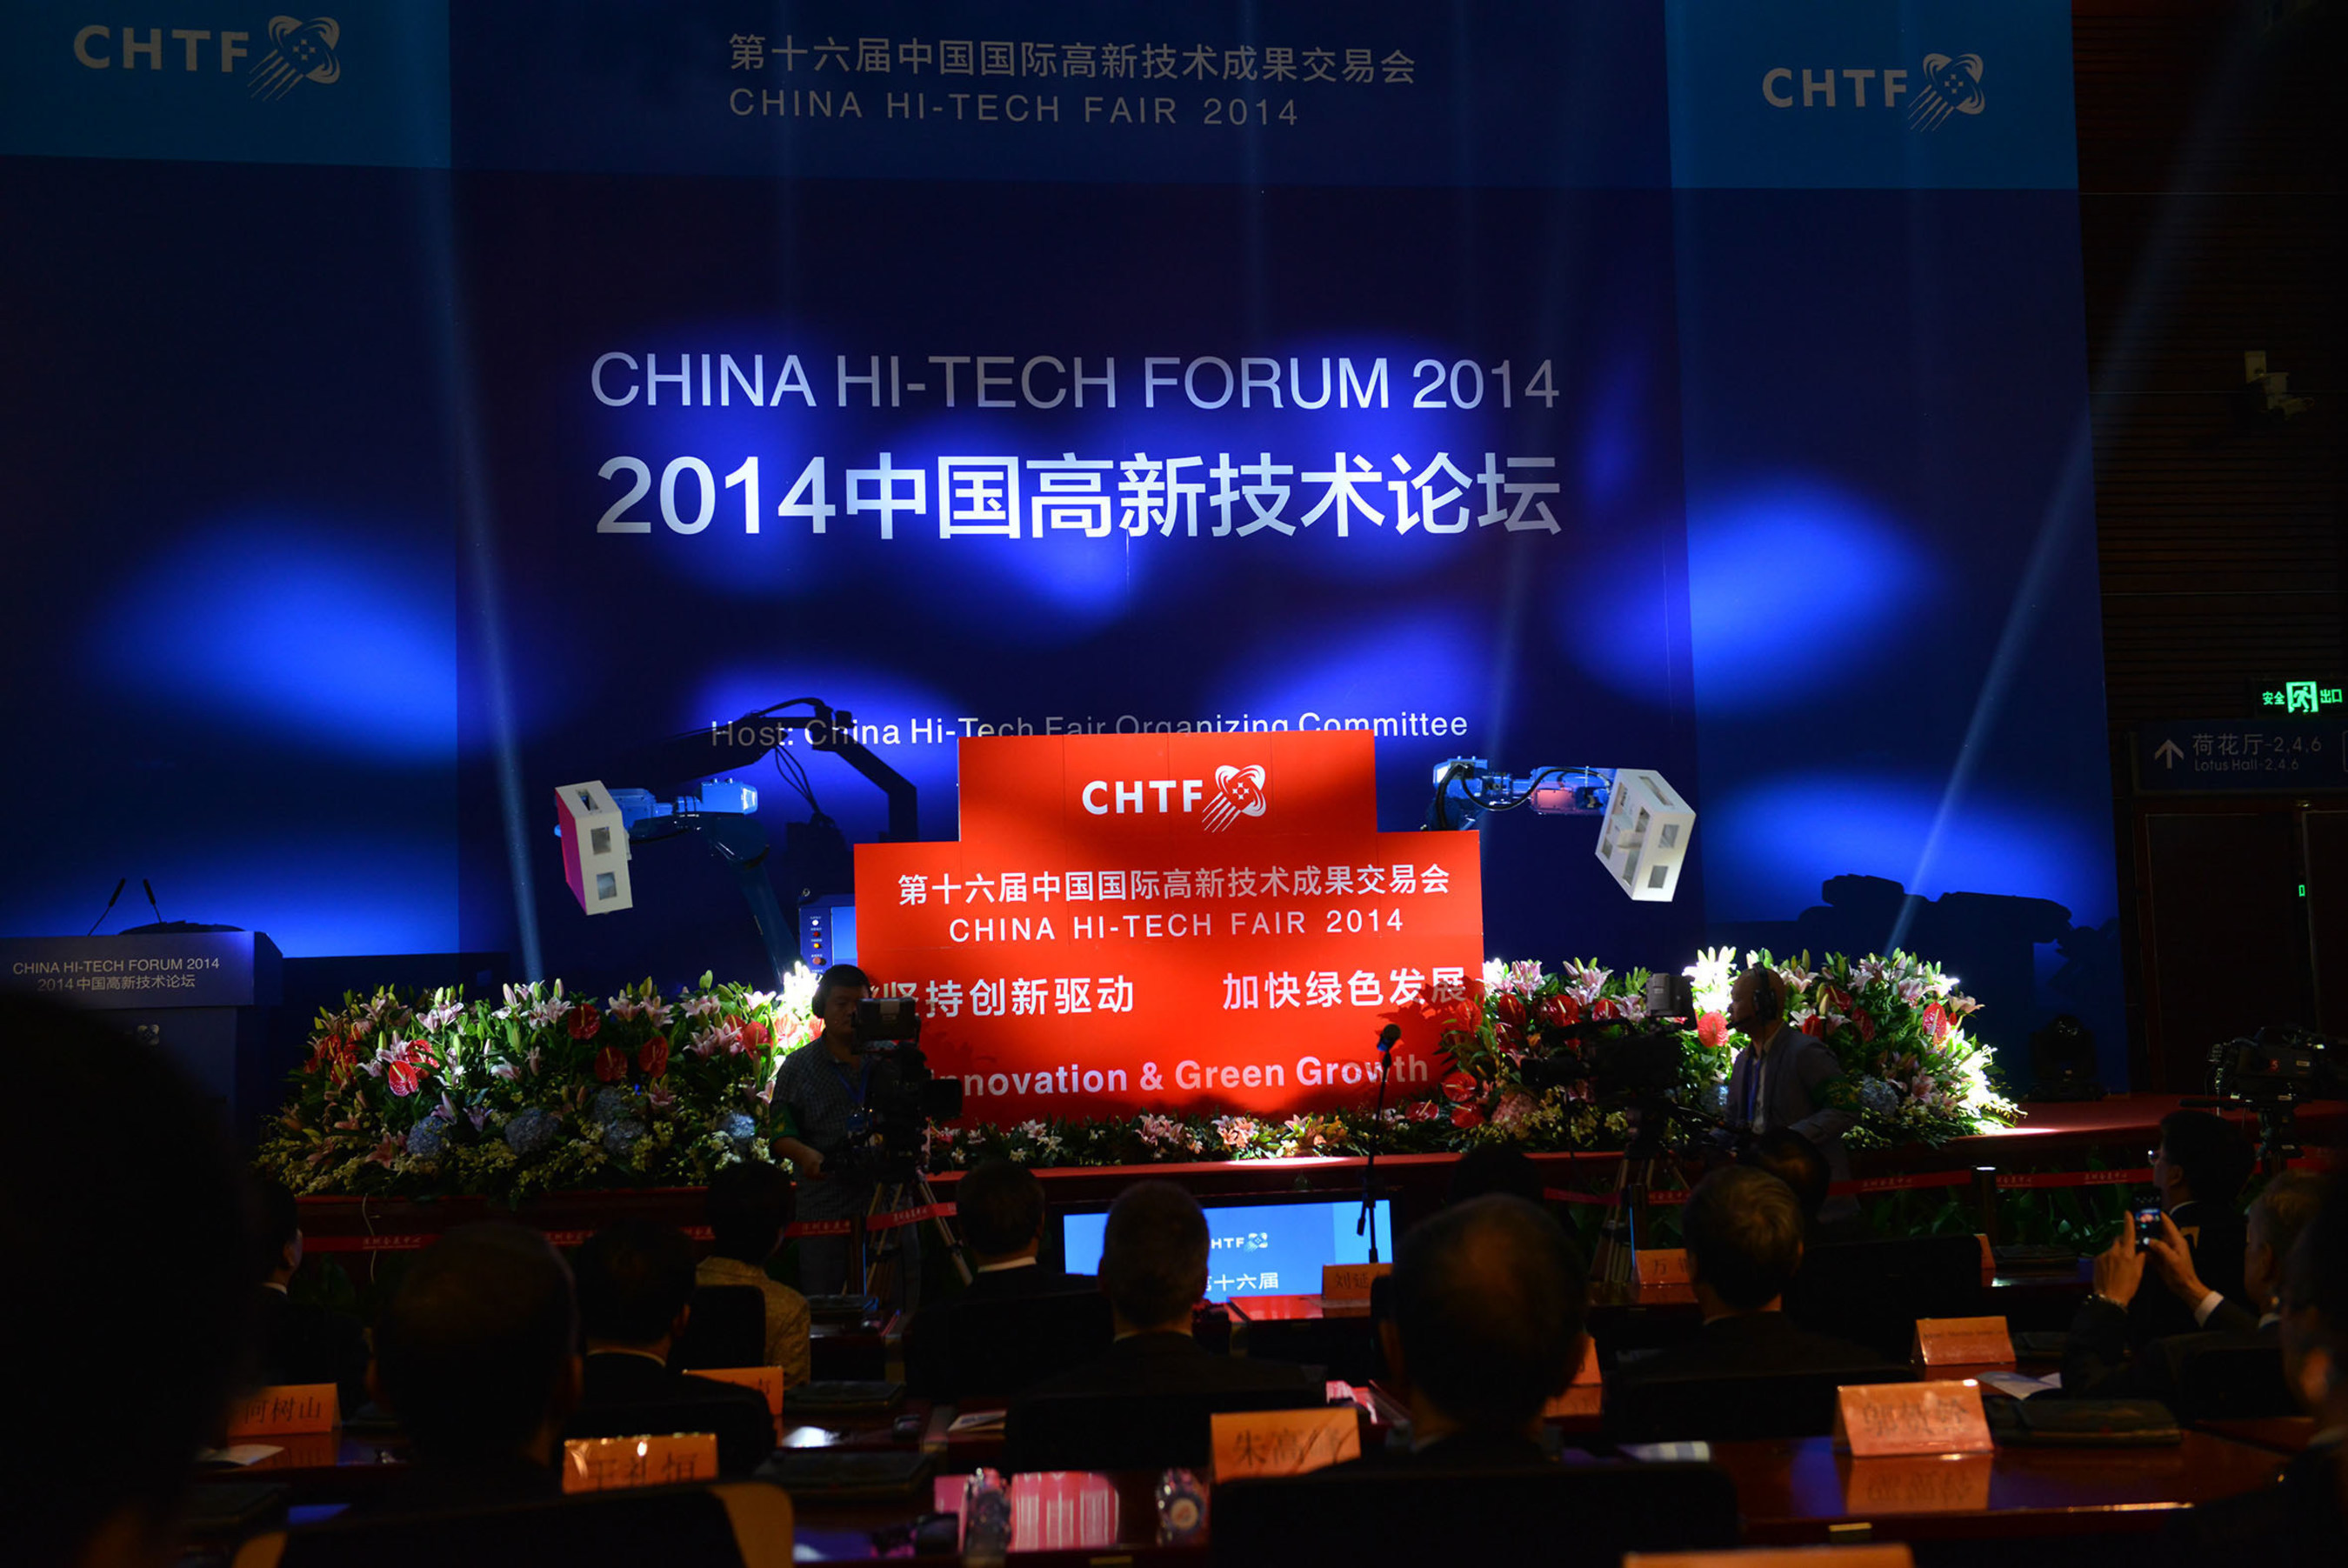 The opening ceremony show of China Hi-Tech Fair 2014